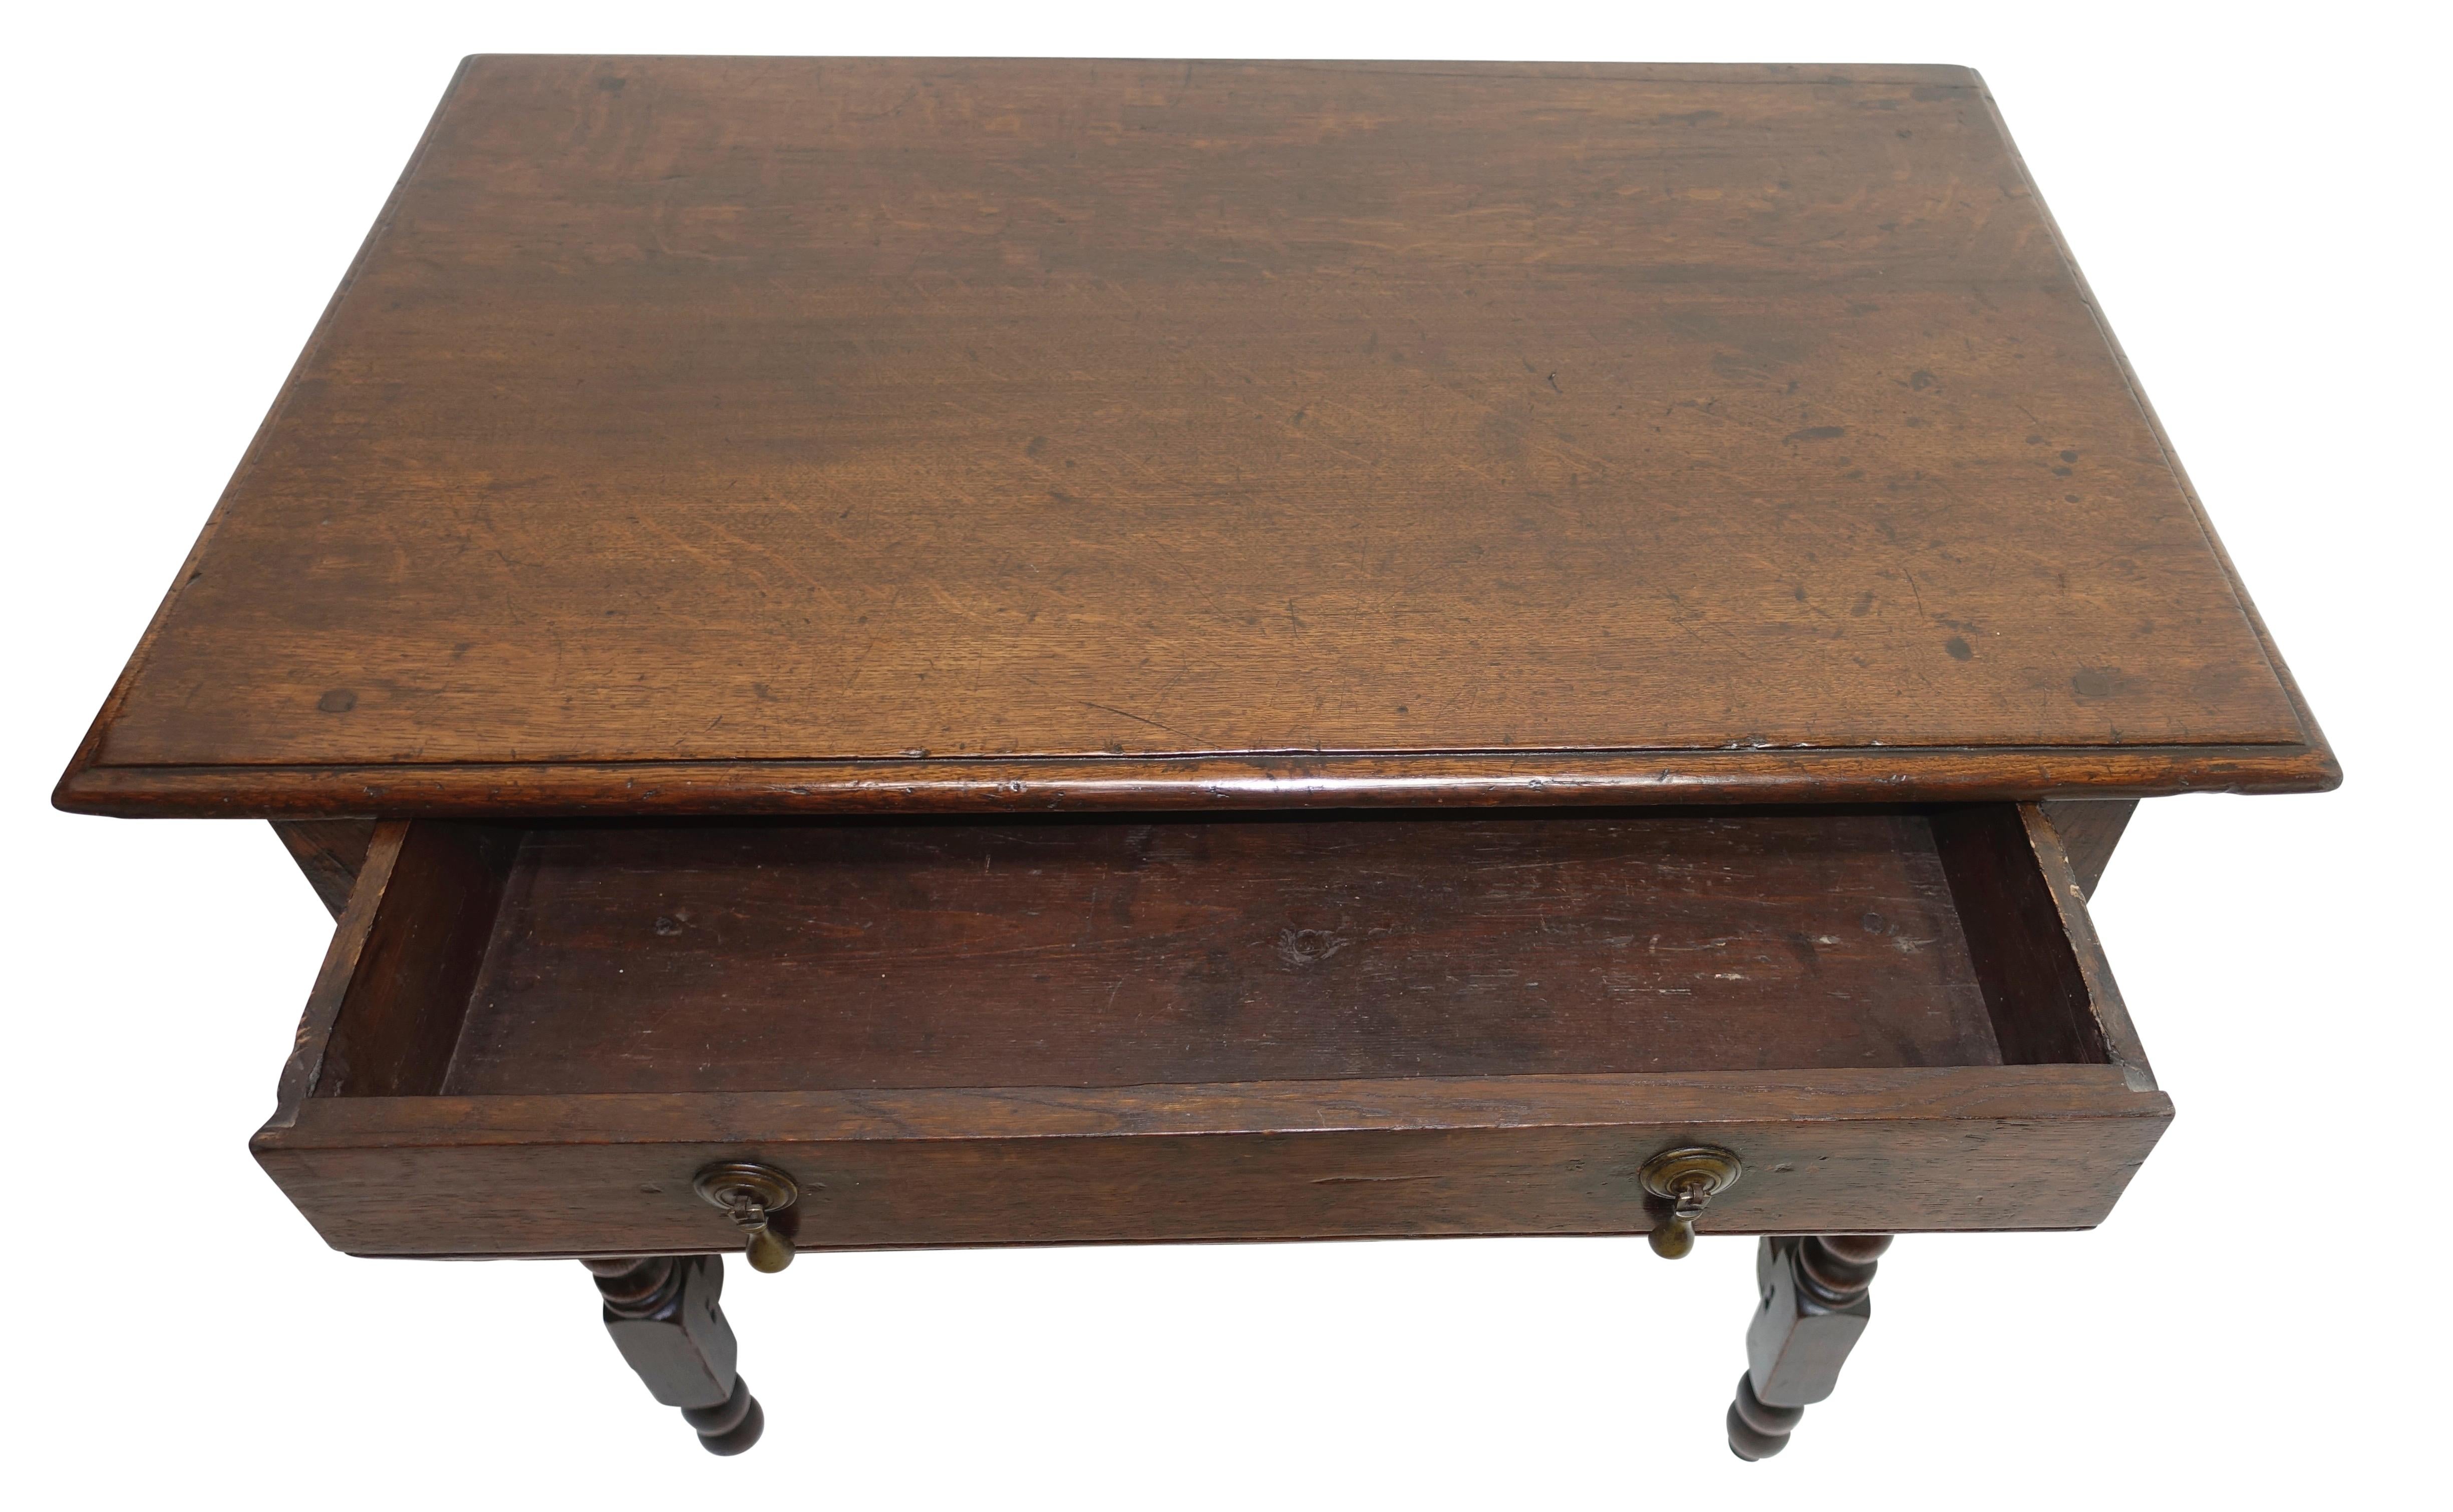 Turned Oak Side Table or Writing Table, English Early 18th Century